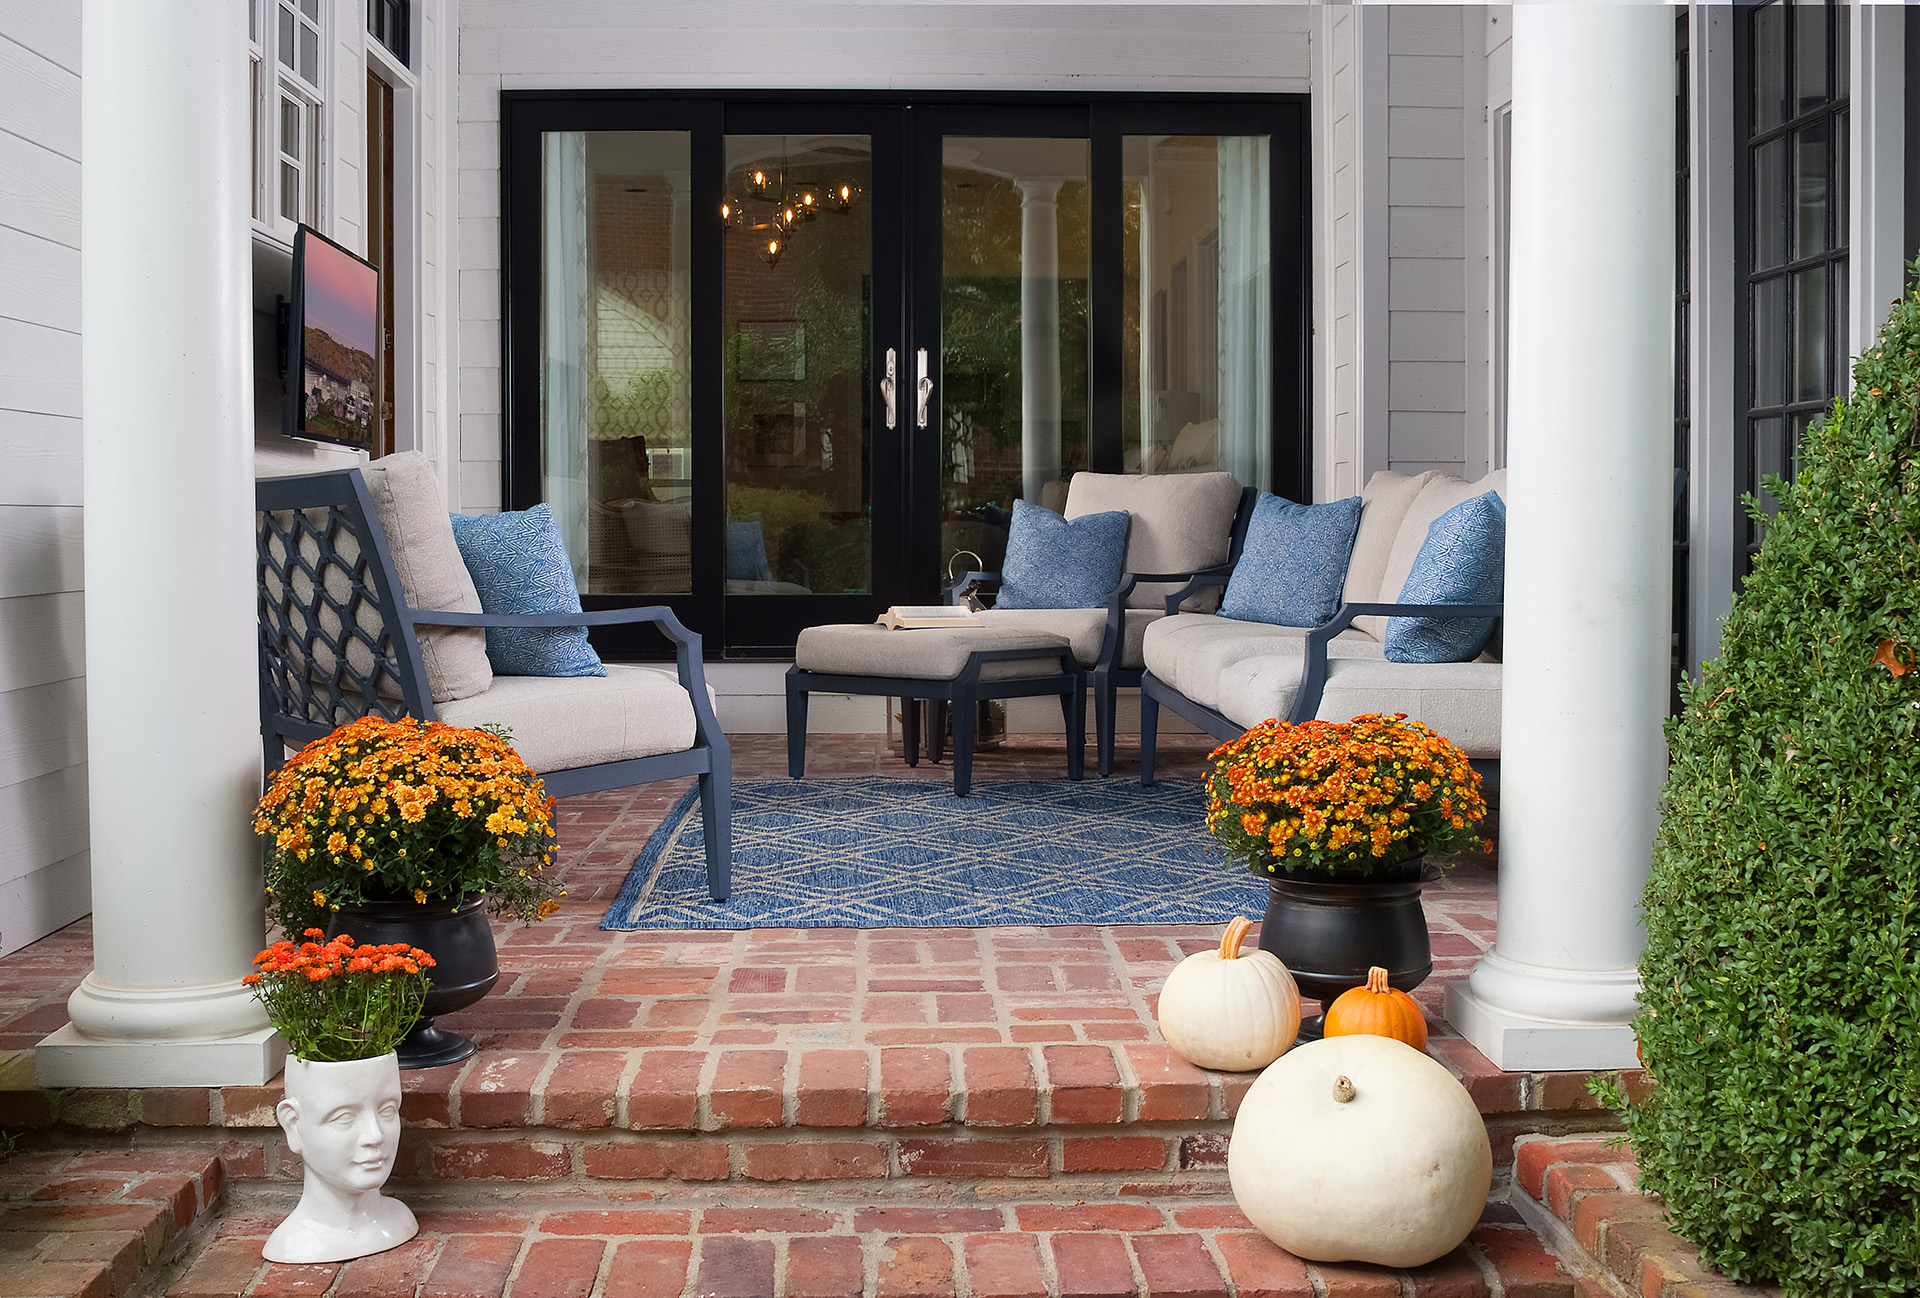 Revive Your Front Yard with these Design Tips (Part 1/2)